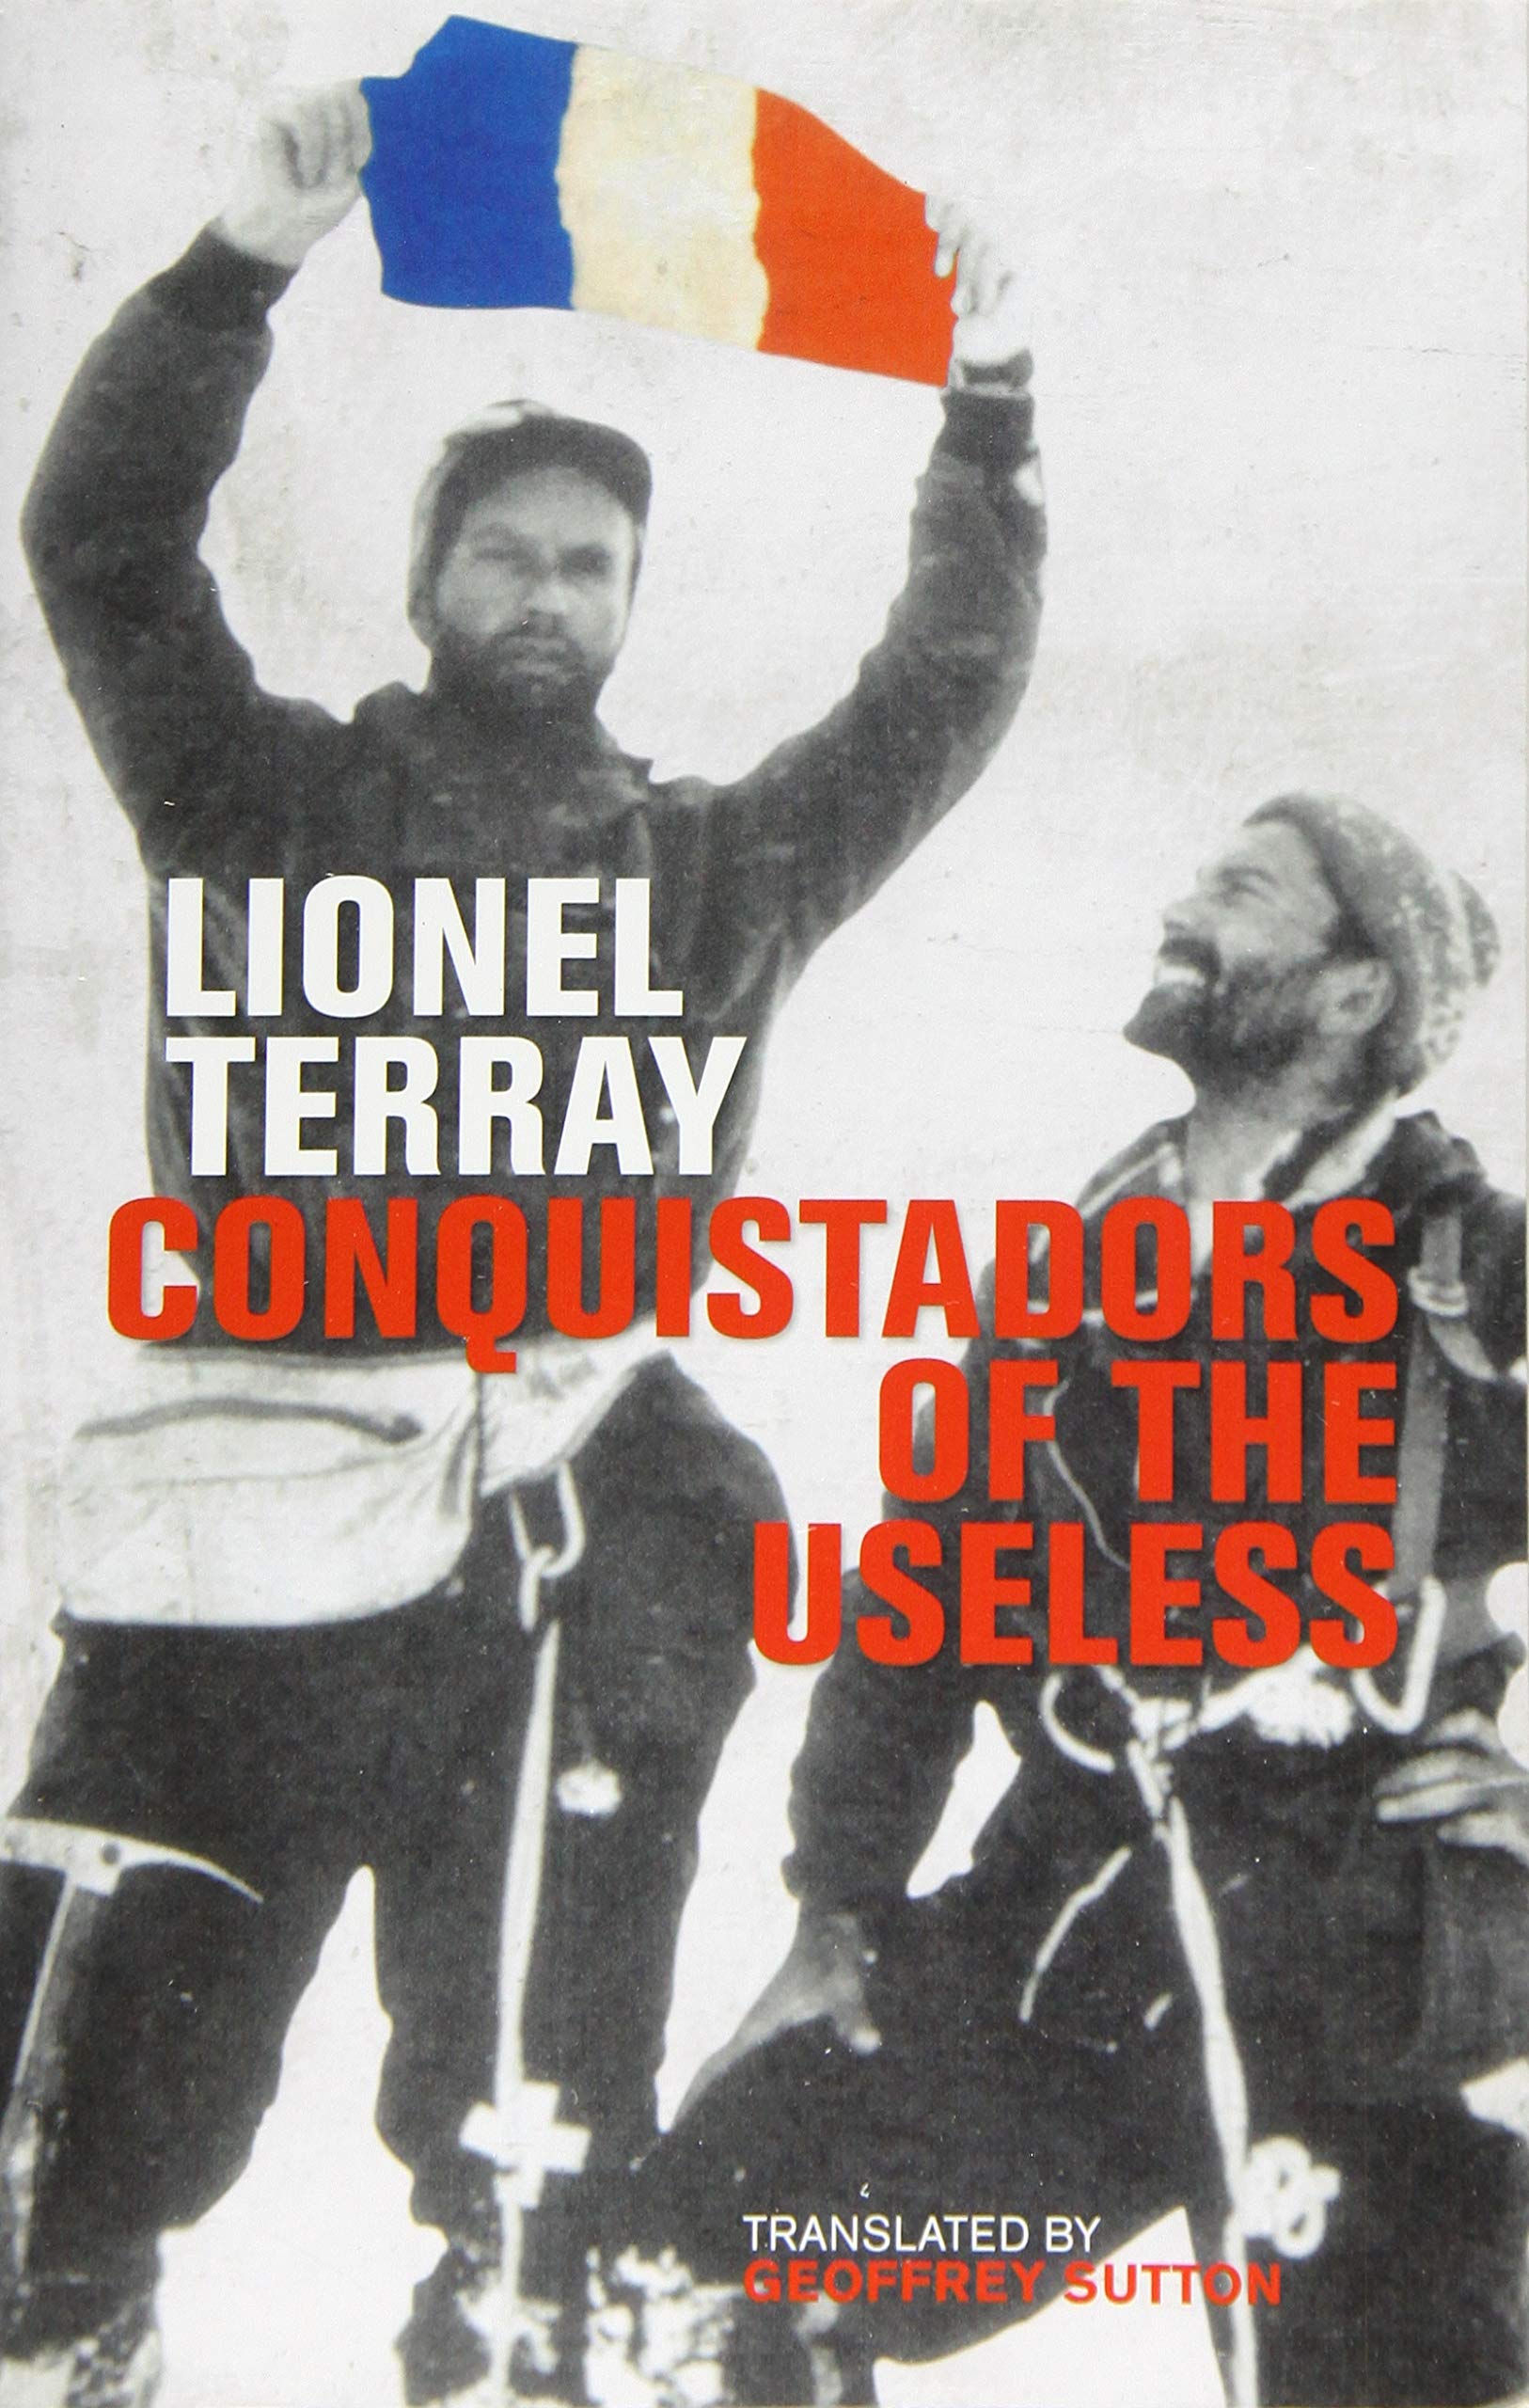 Conquistadors of the Useless | Lionel Terray, David Roberts